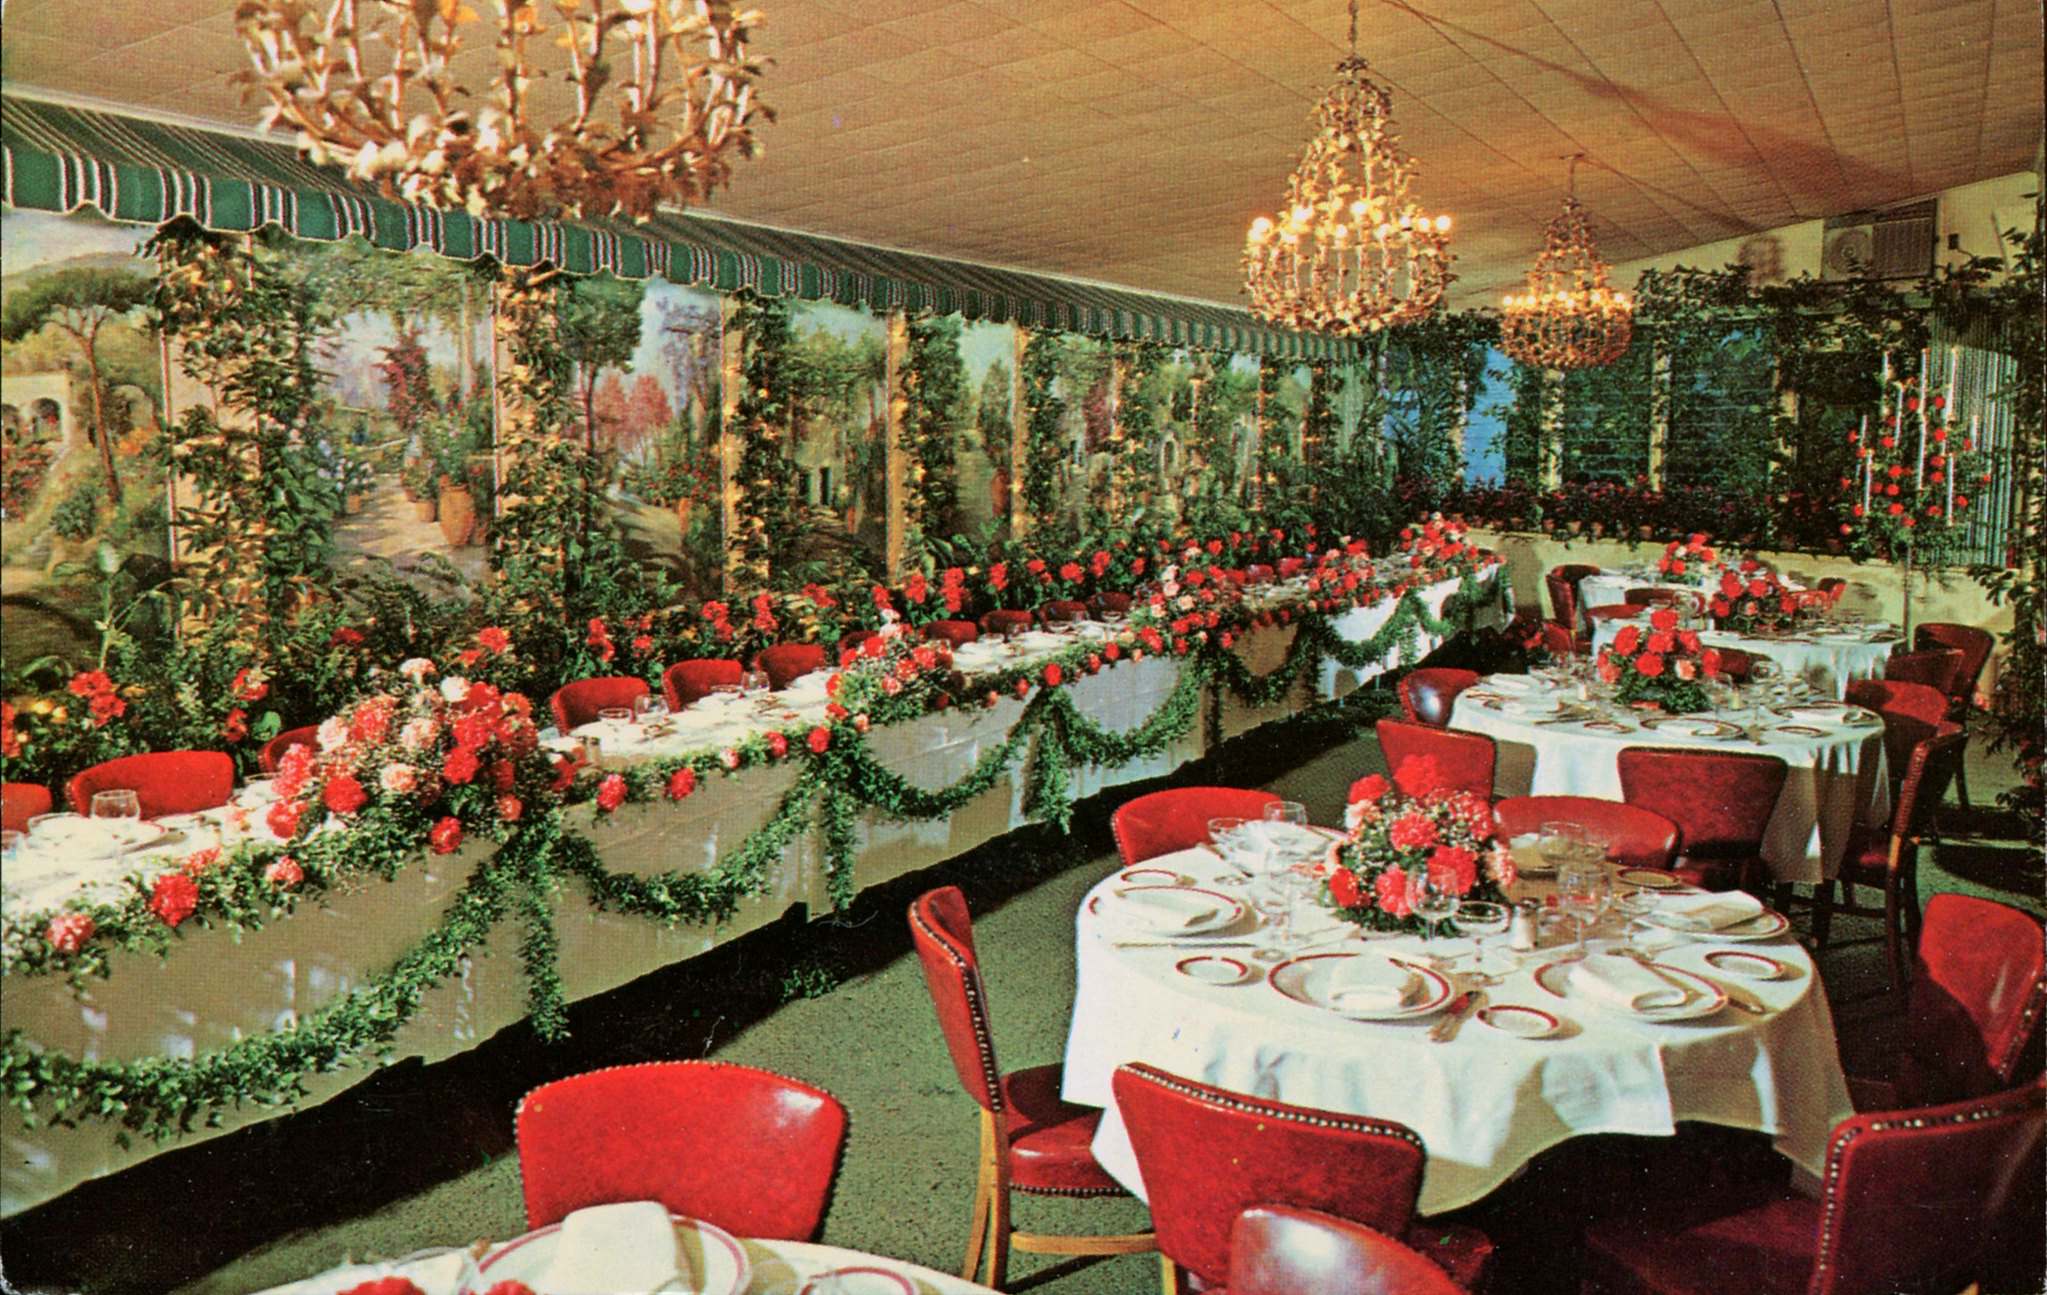 Beautiful and Unique Restaurants of the U.S. from the 1950s